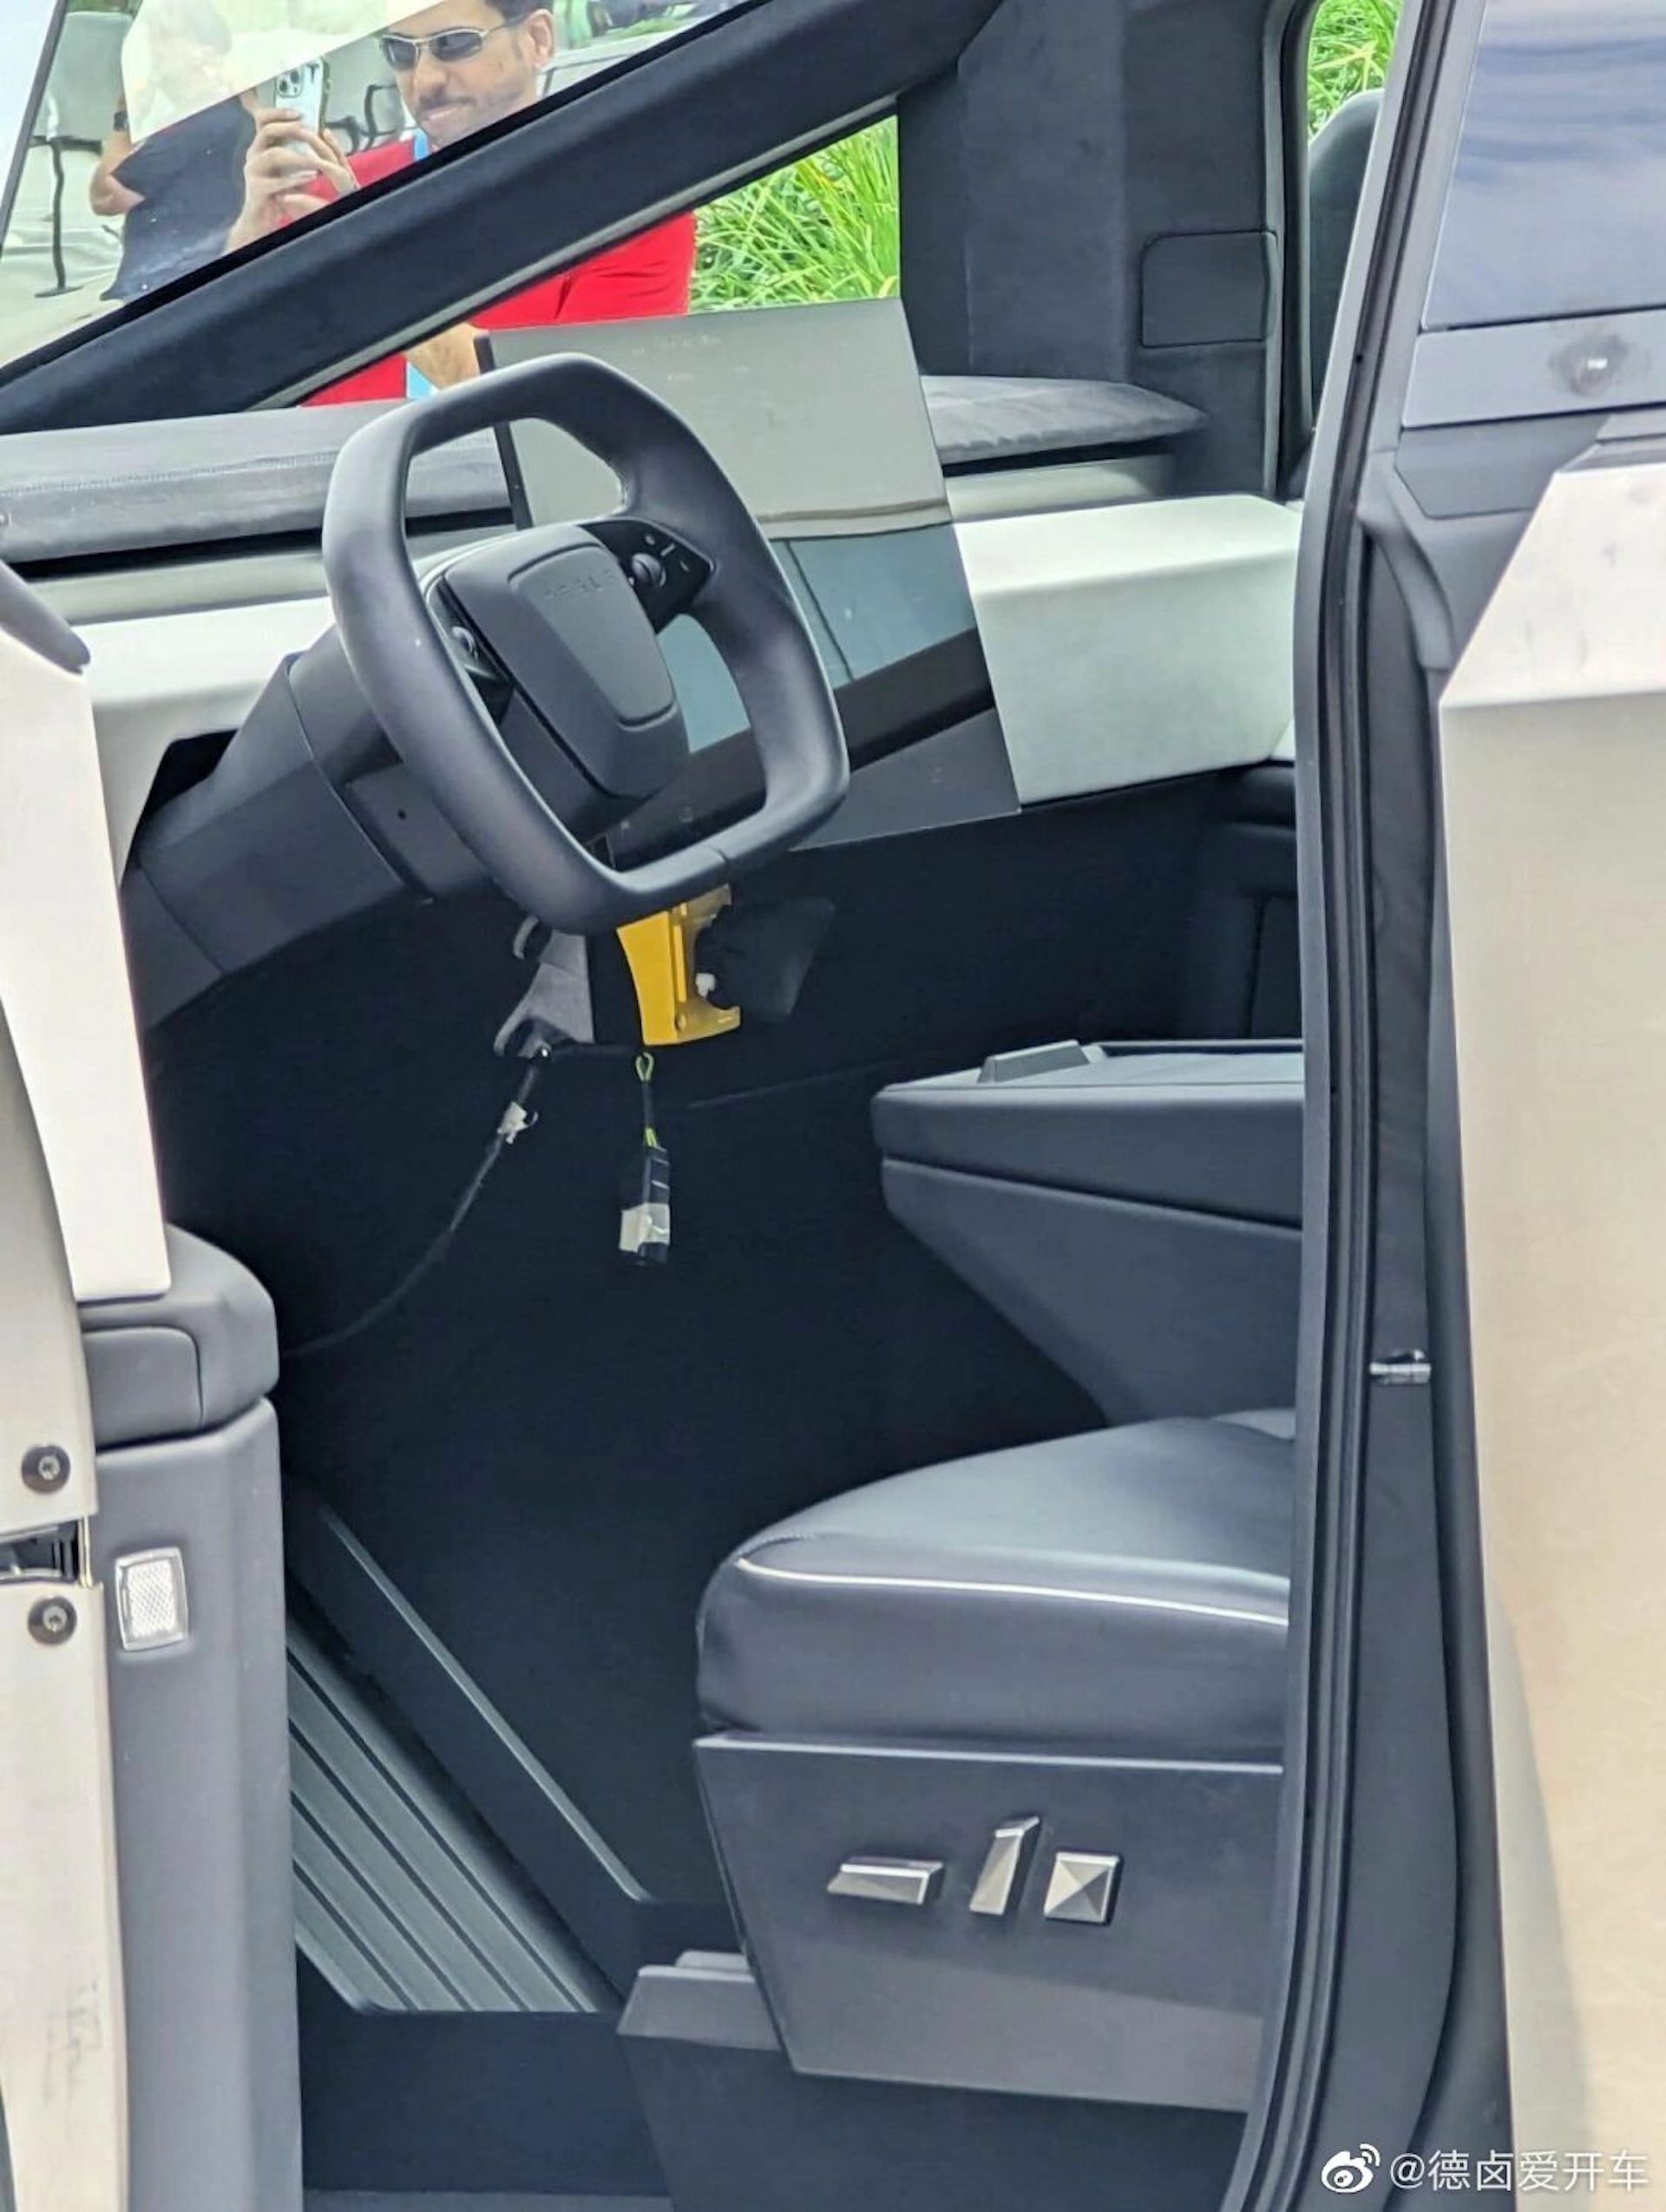 Tesla Cybertruck: Here’s What It Looks Like From The Driver’s Seat ...